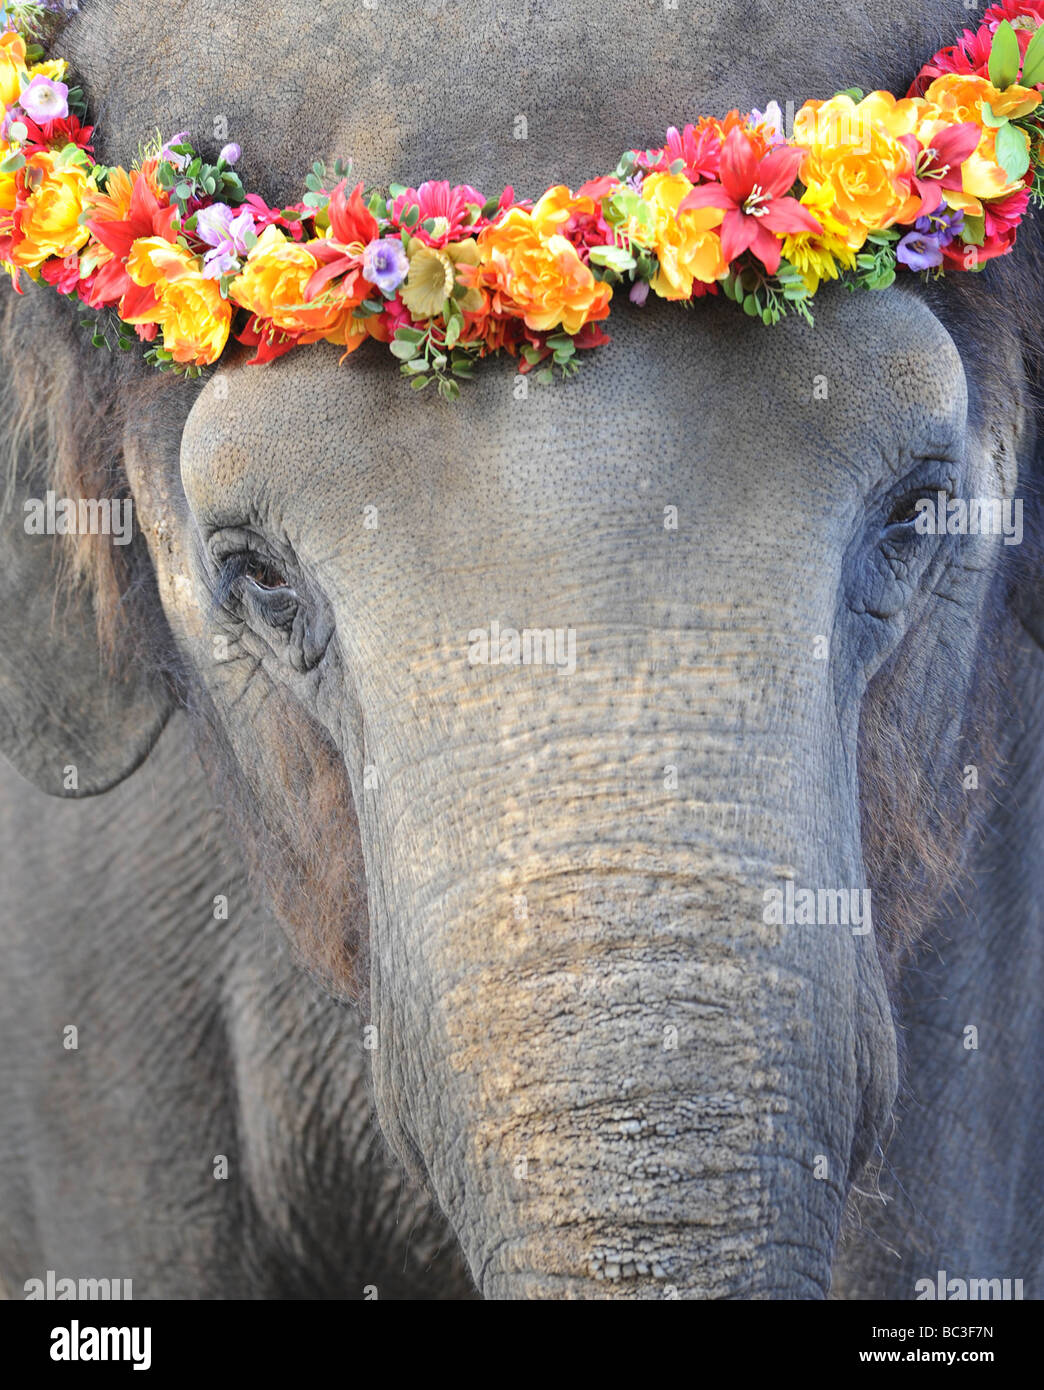 full frame close up of asian elephant with flower lay on head, bangkok, thailand, asia Stock Photo